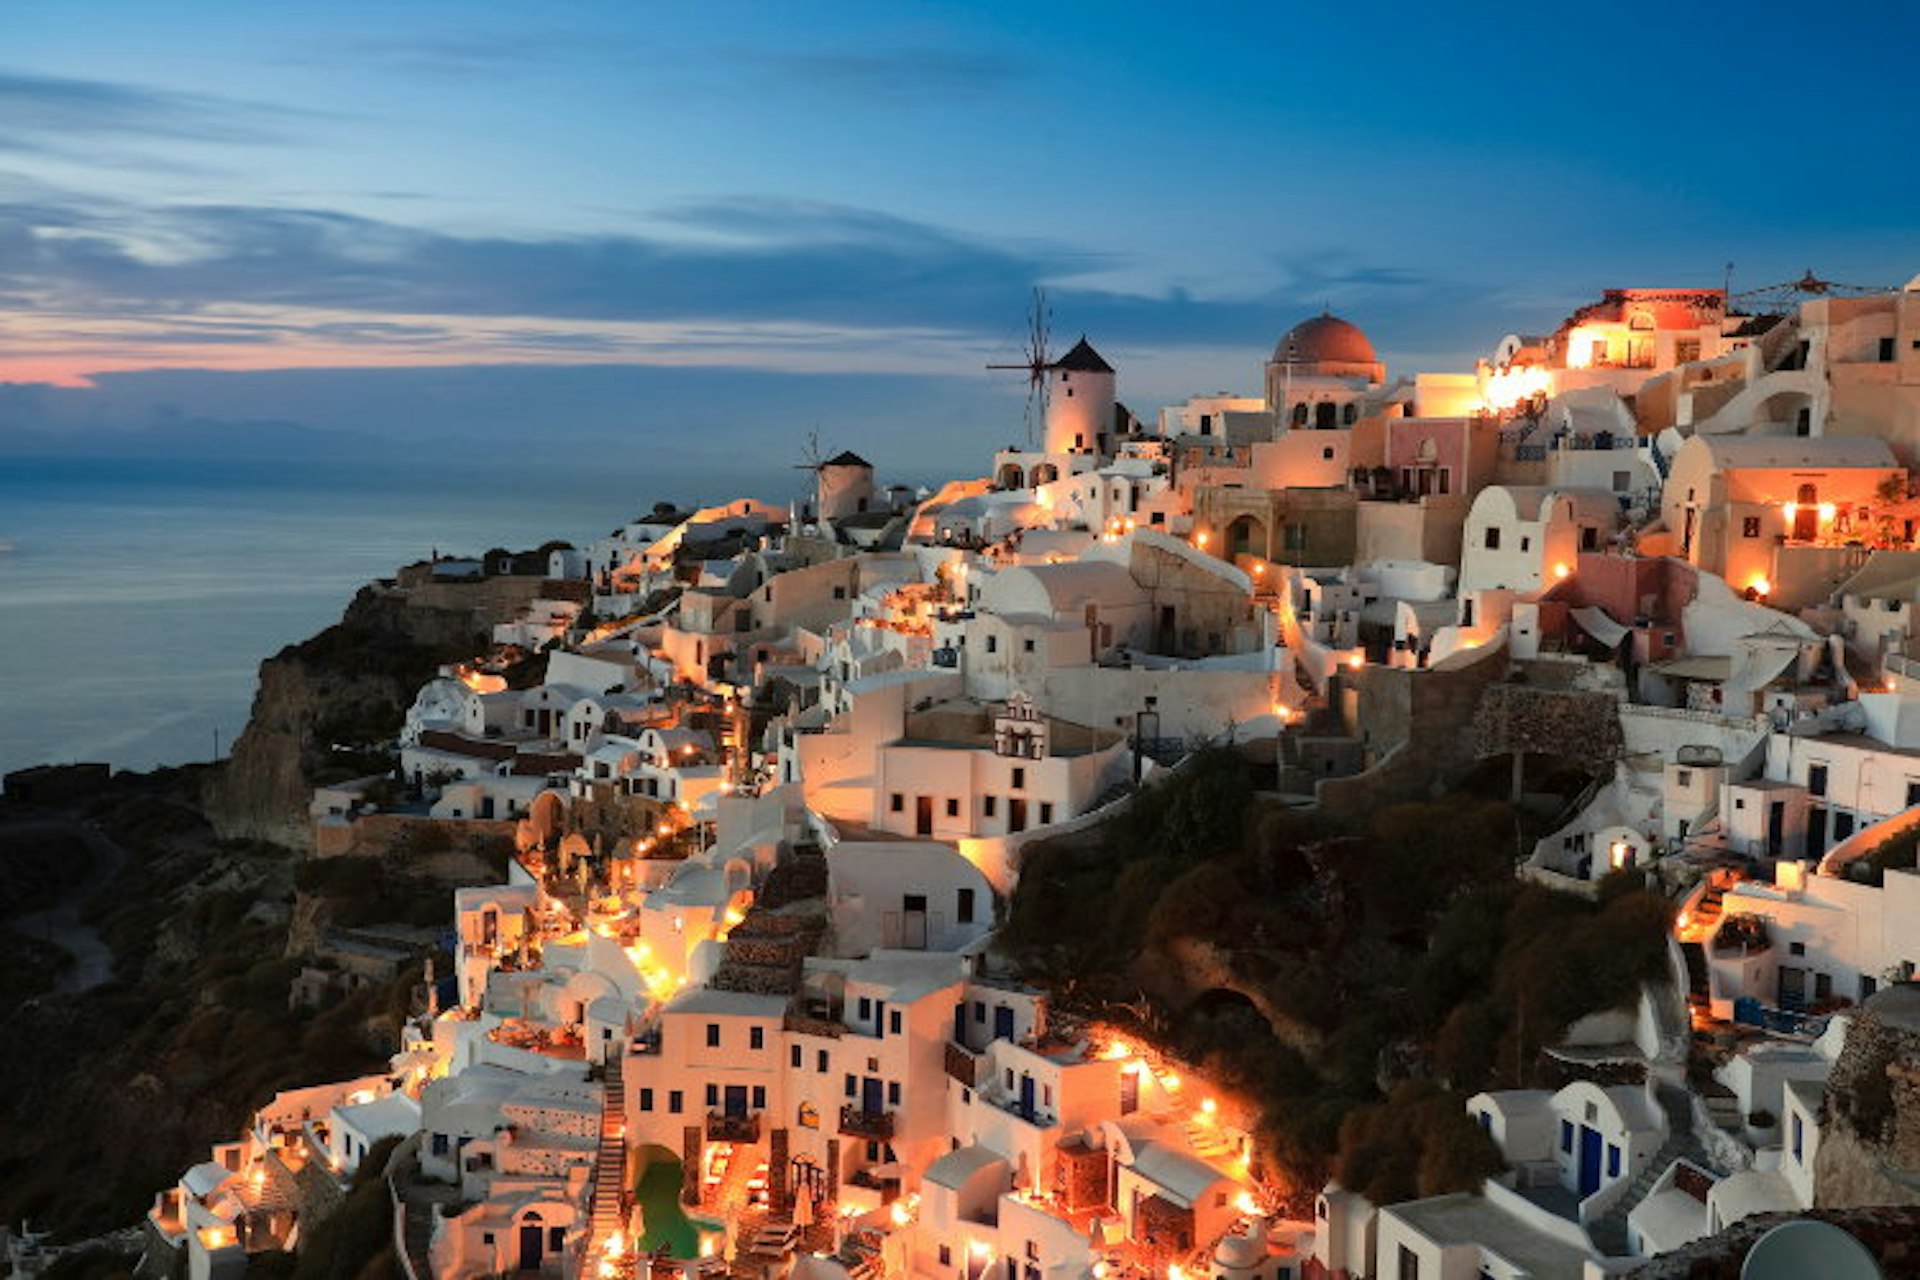 The famous Santorini sunset. Image by Hanquan Chen / Getty Images